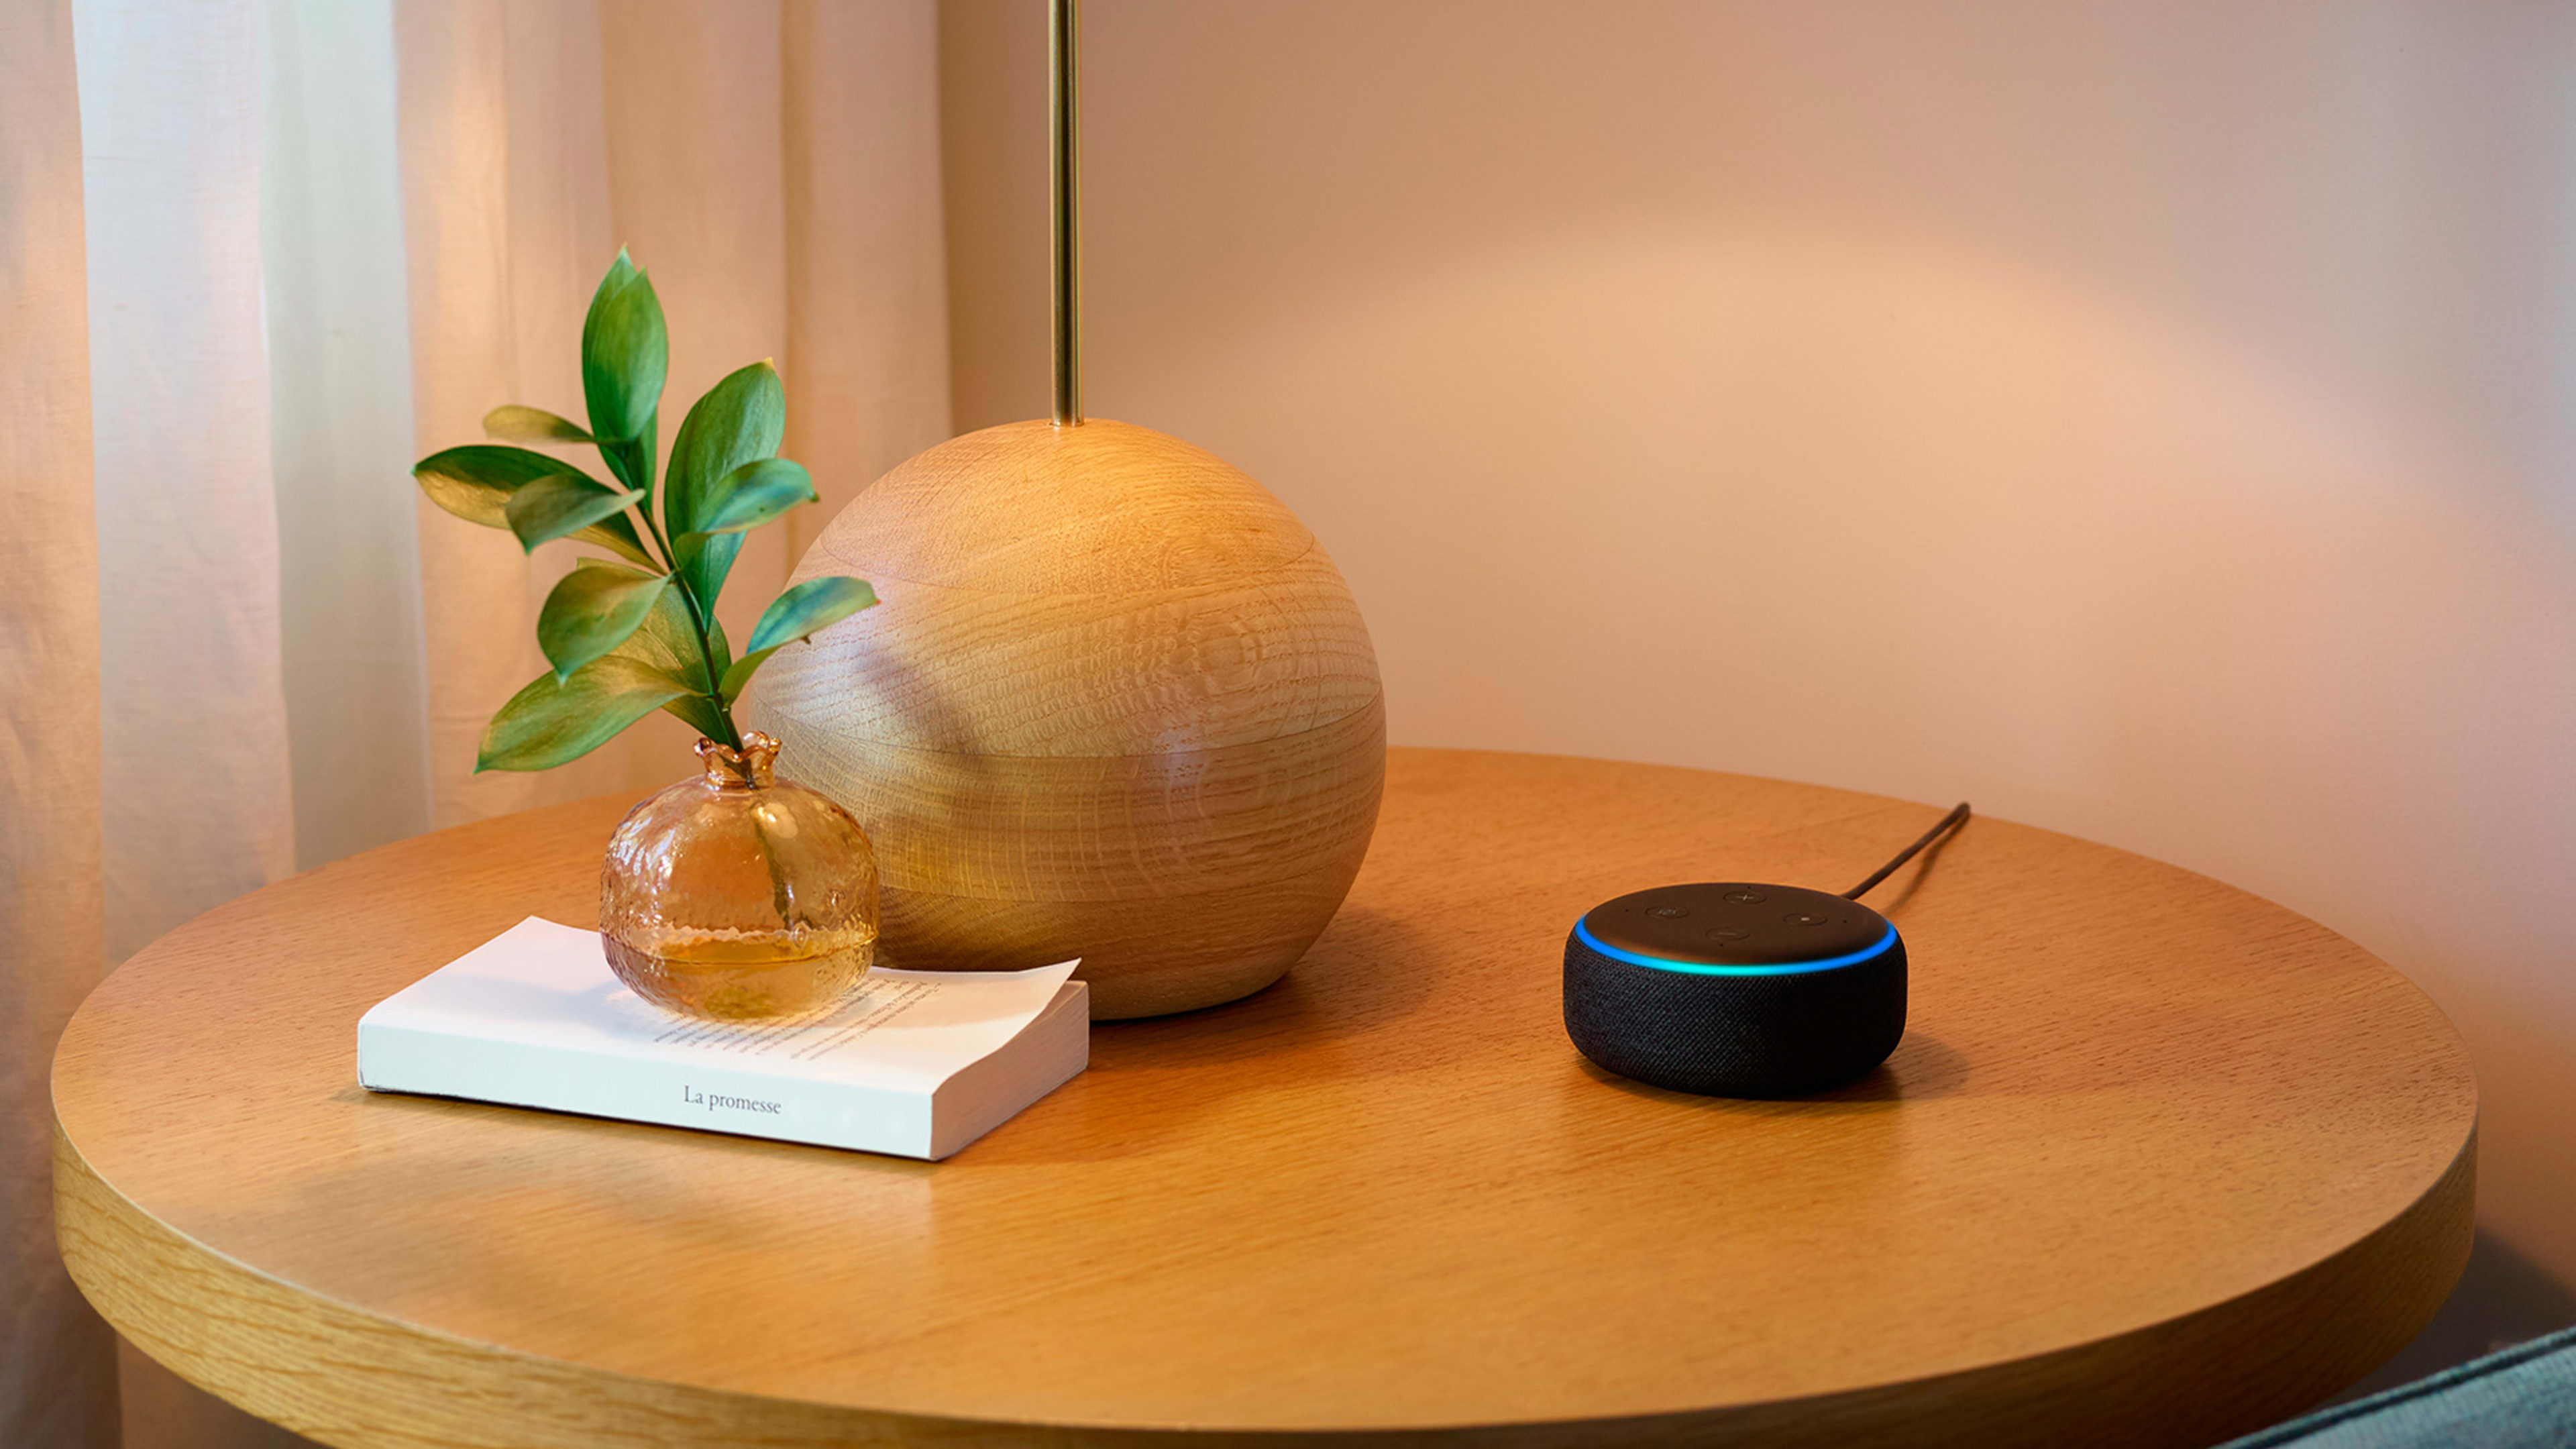 Sirius XM and Amazon are teaming up to promote Echo devices